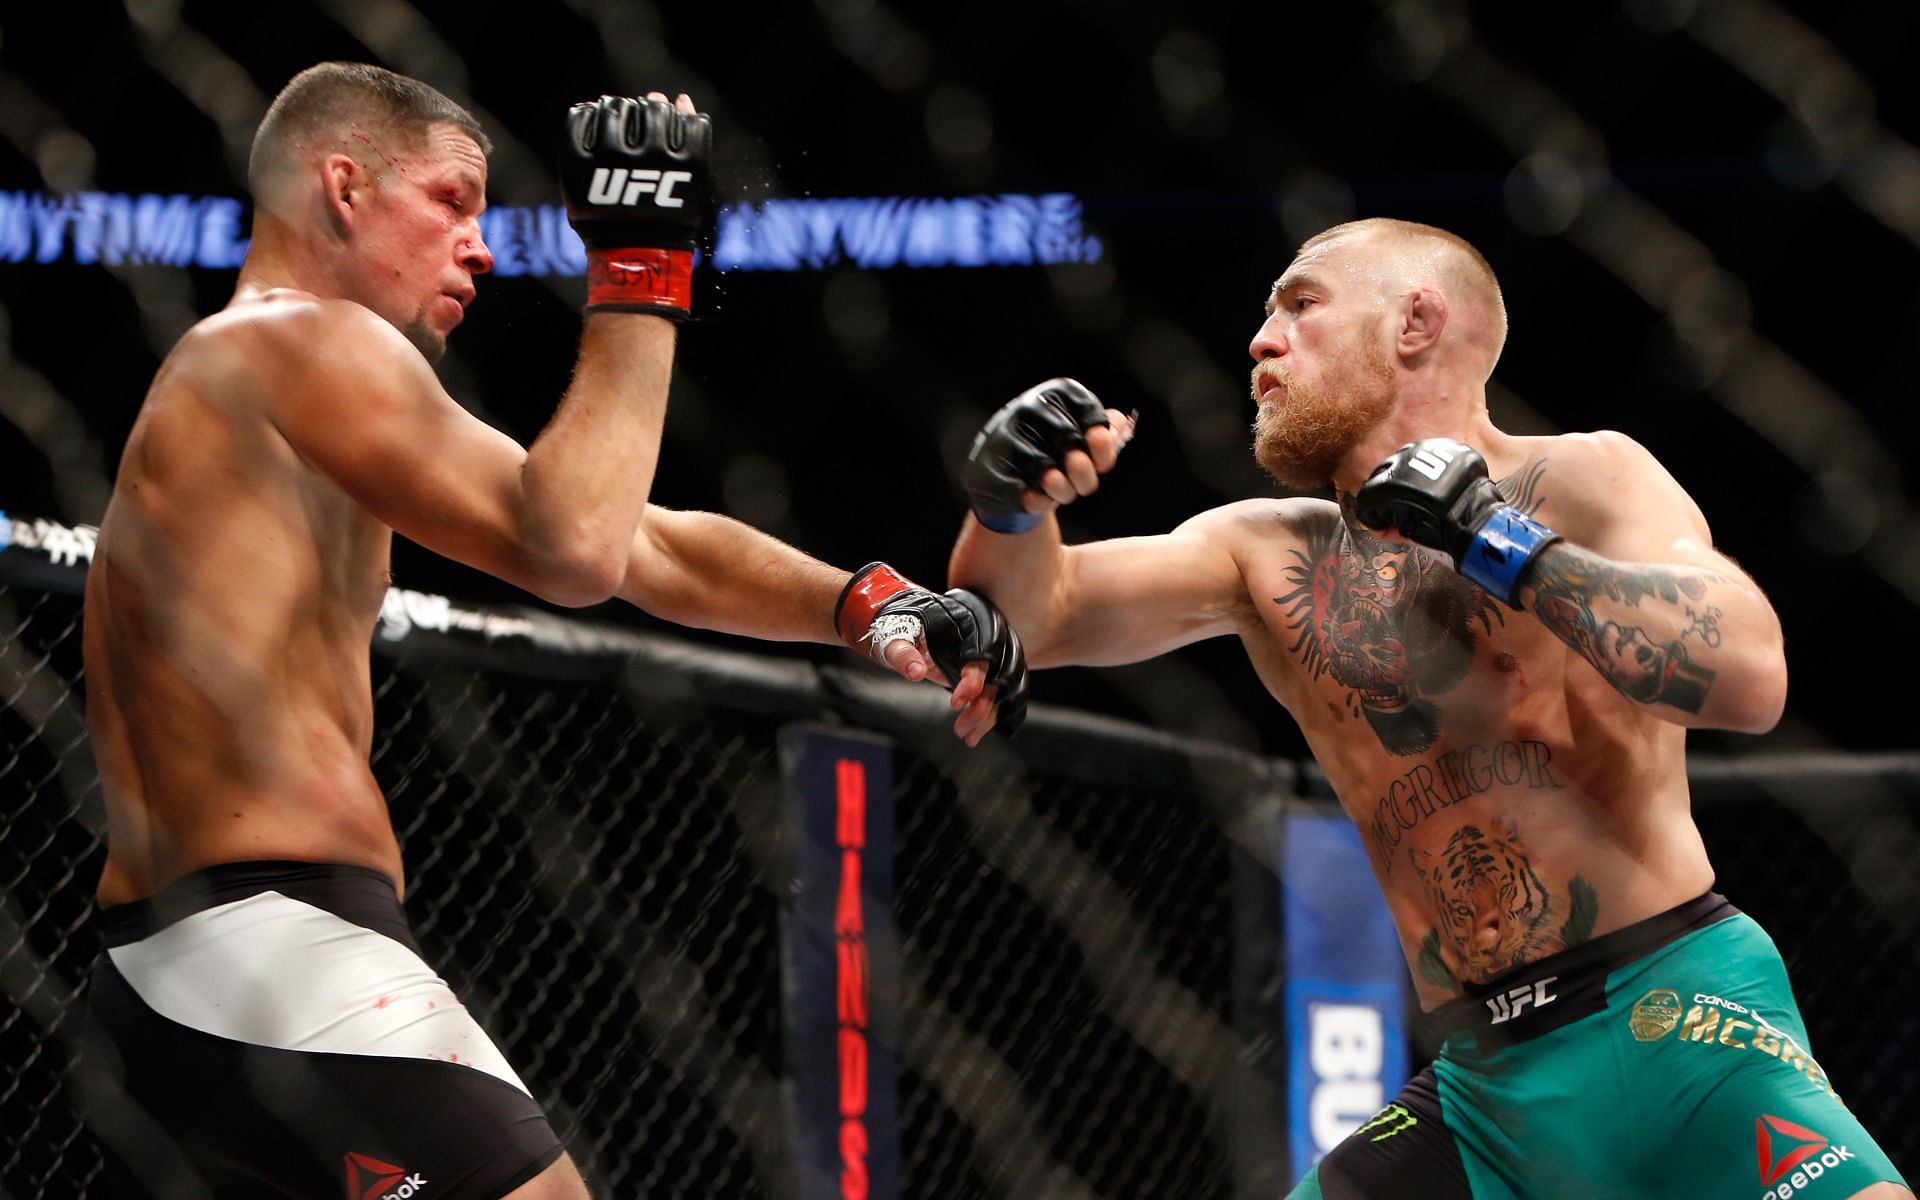 Despite it being a non-title fight, a third bout between Conor McGregor and Nate Diaz would be huge for the UFC